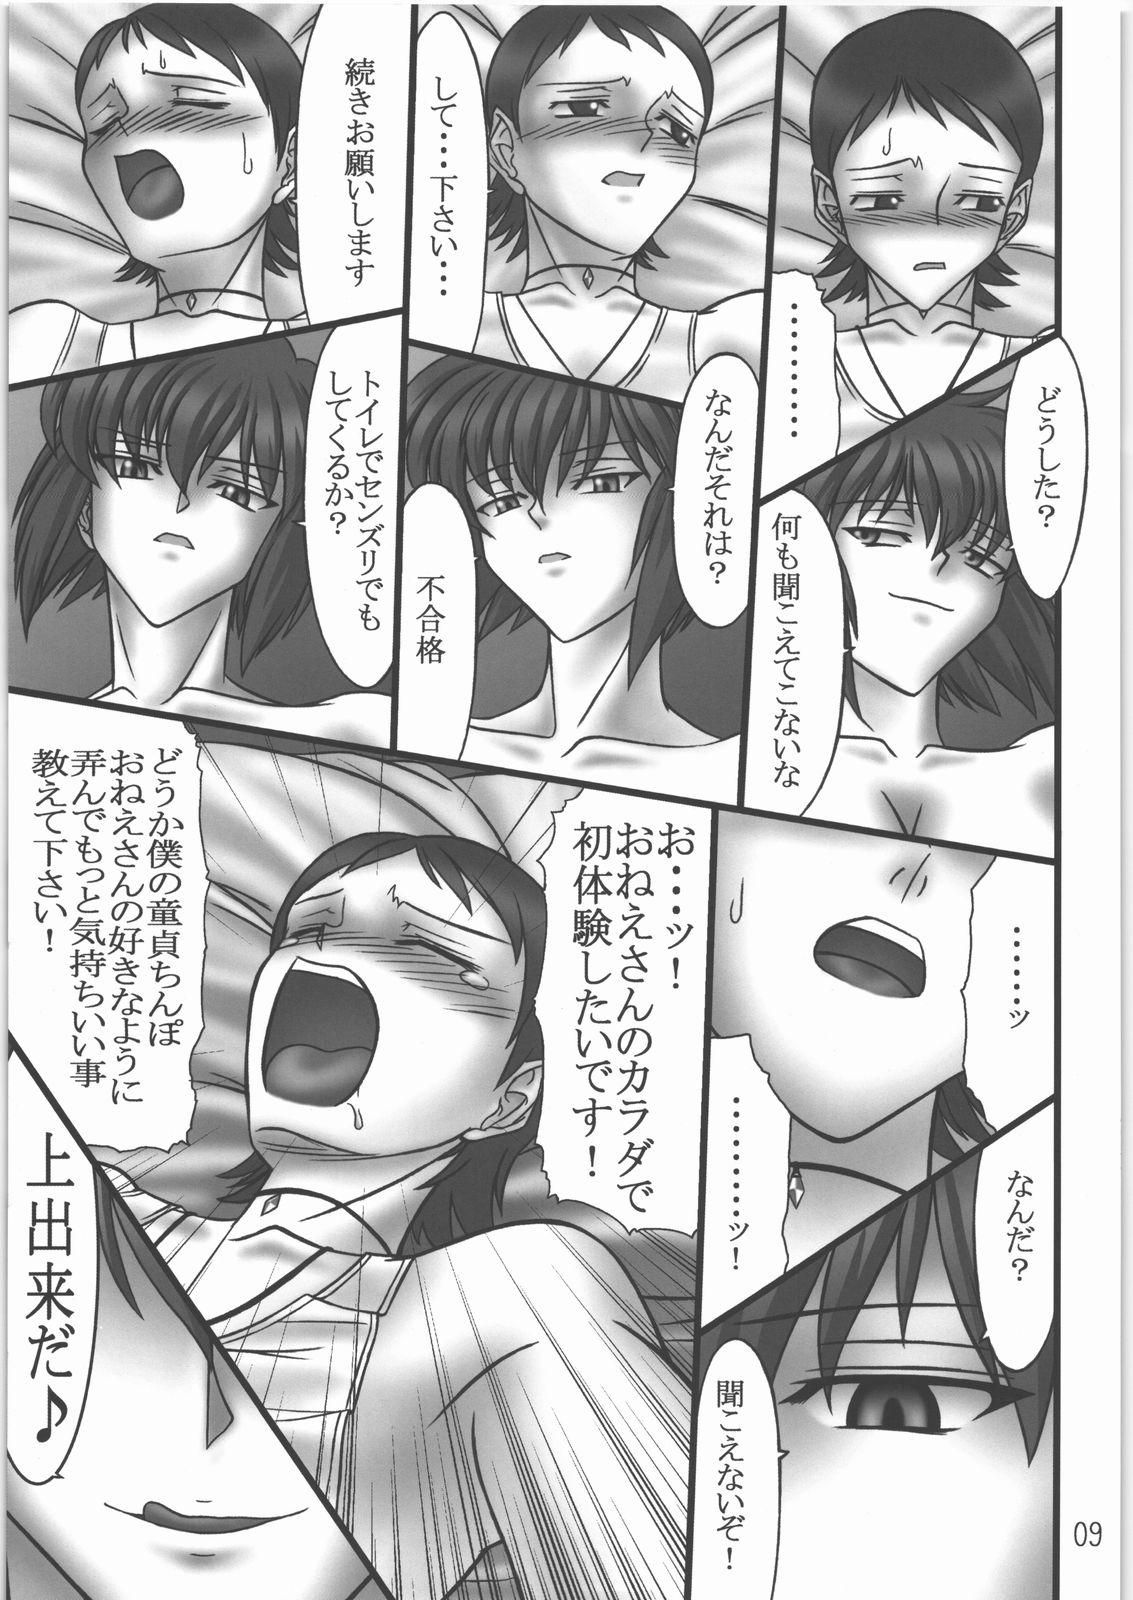 Pounding Application Error 1208 - Ghost in the shell Gay Cut - Page 10